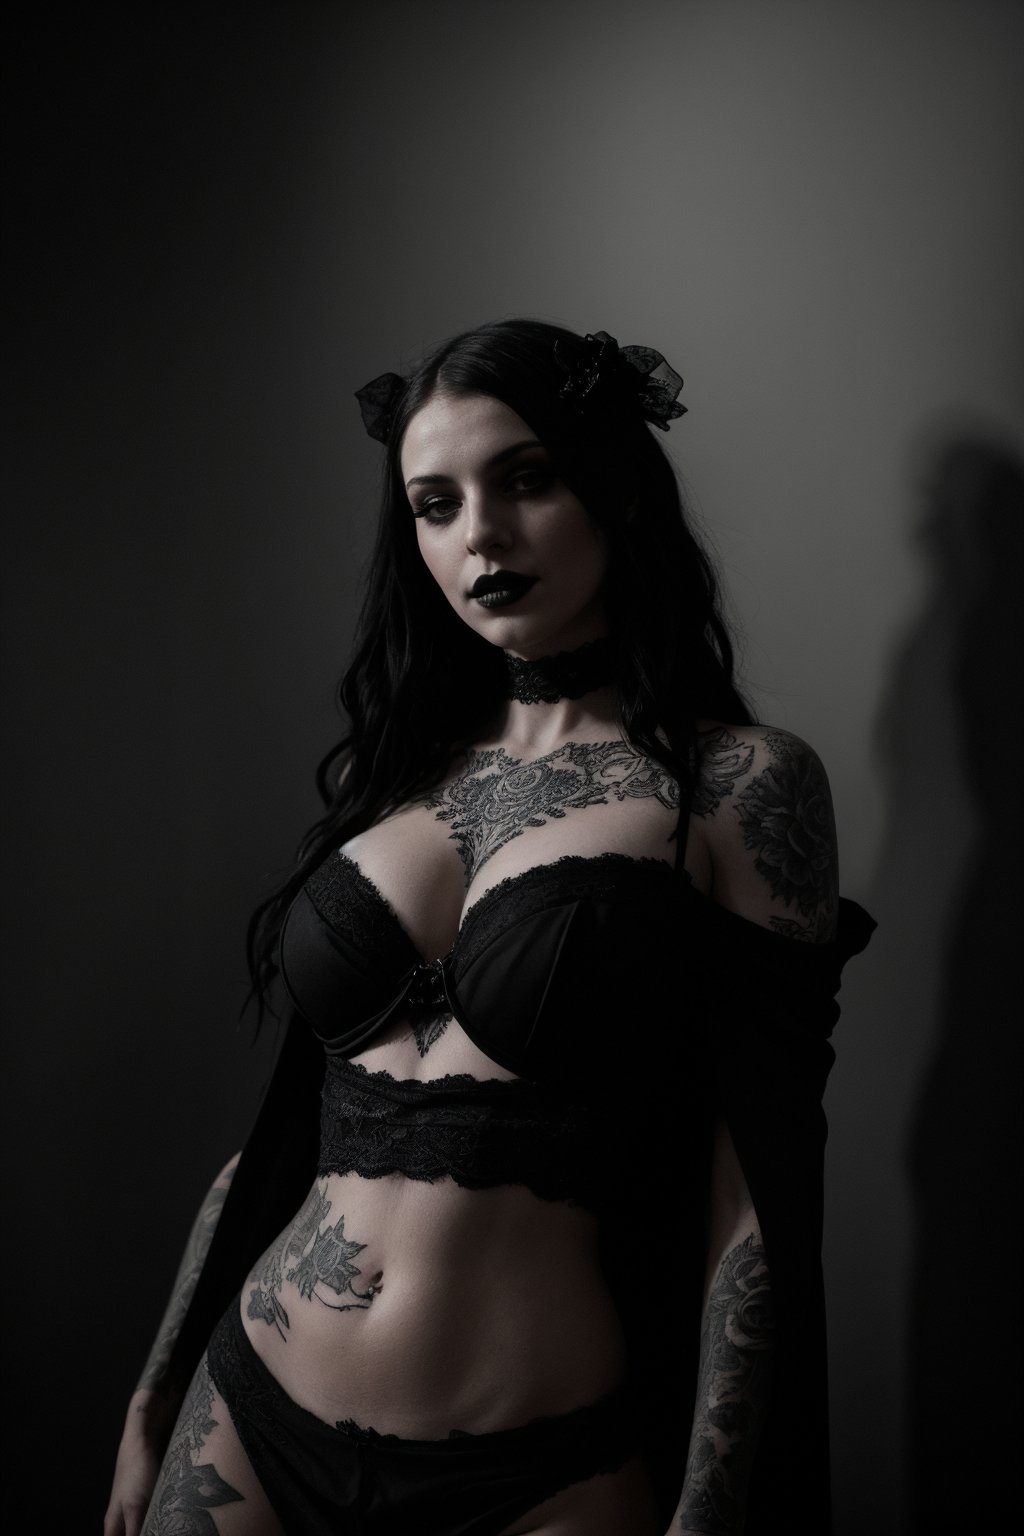 In a Rembrandt-inspired oil painting, a goth girl with black lipstick and ((tattooed)) skin assumes a dynamic pose, her full figure draped in lace accents that accentuate her curves. The setting is plunged into darkness, where atmospheric lighting casts sharp shadows and textured brushwork brings forth intricate details. Her expressive facial features, partially veiled by shadows, convey pain and sadness mingling with erotism. A 35mm photograph captures this moody epic scene in stunning 8k resolution, emphasizing the chiaroscuro technique and proportional composition.